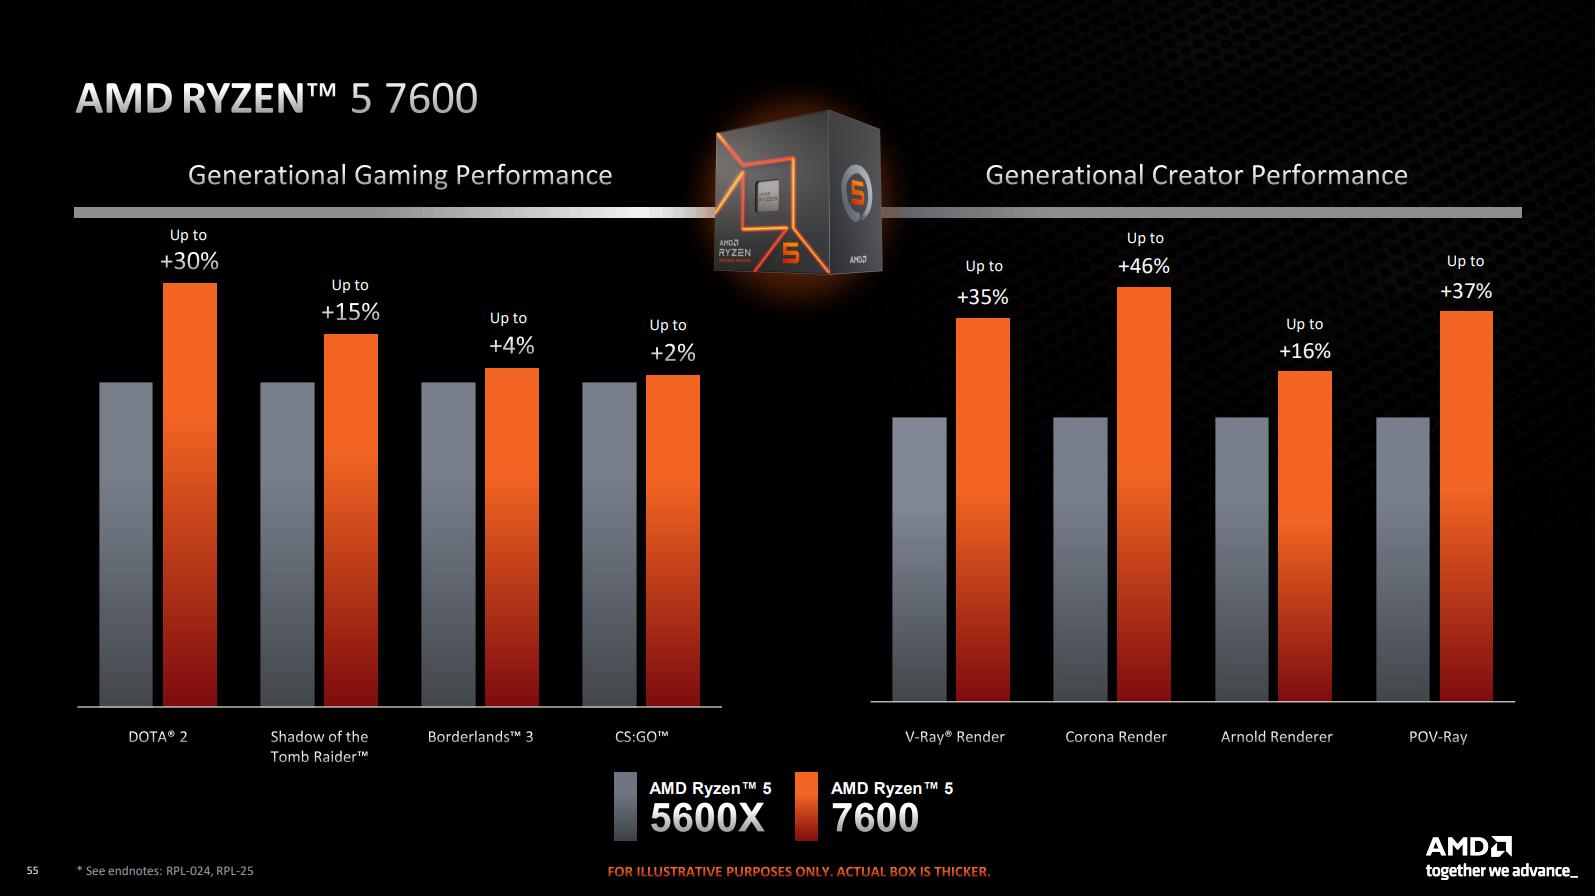 AMD announced Ryzen 7000 processors with a TDP of 65 W